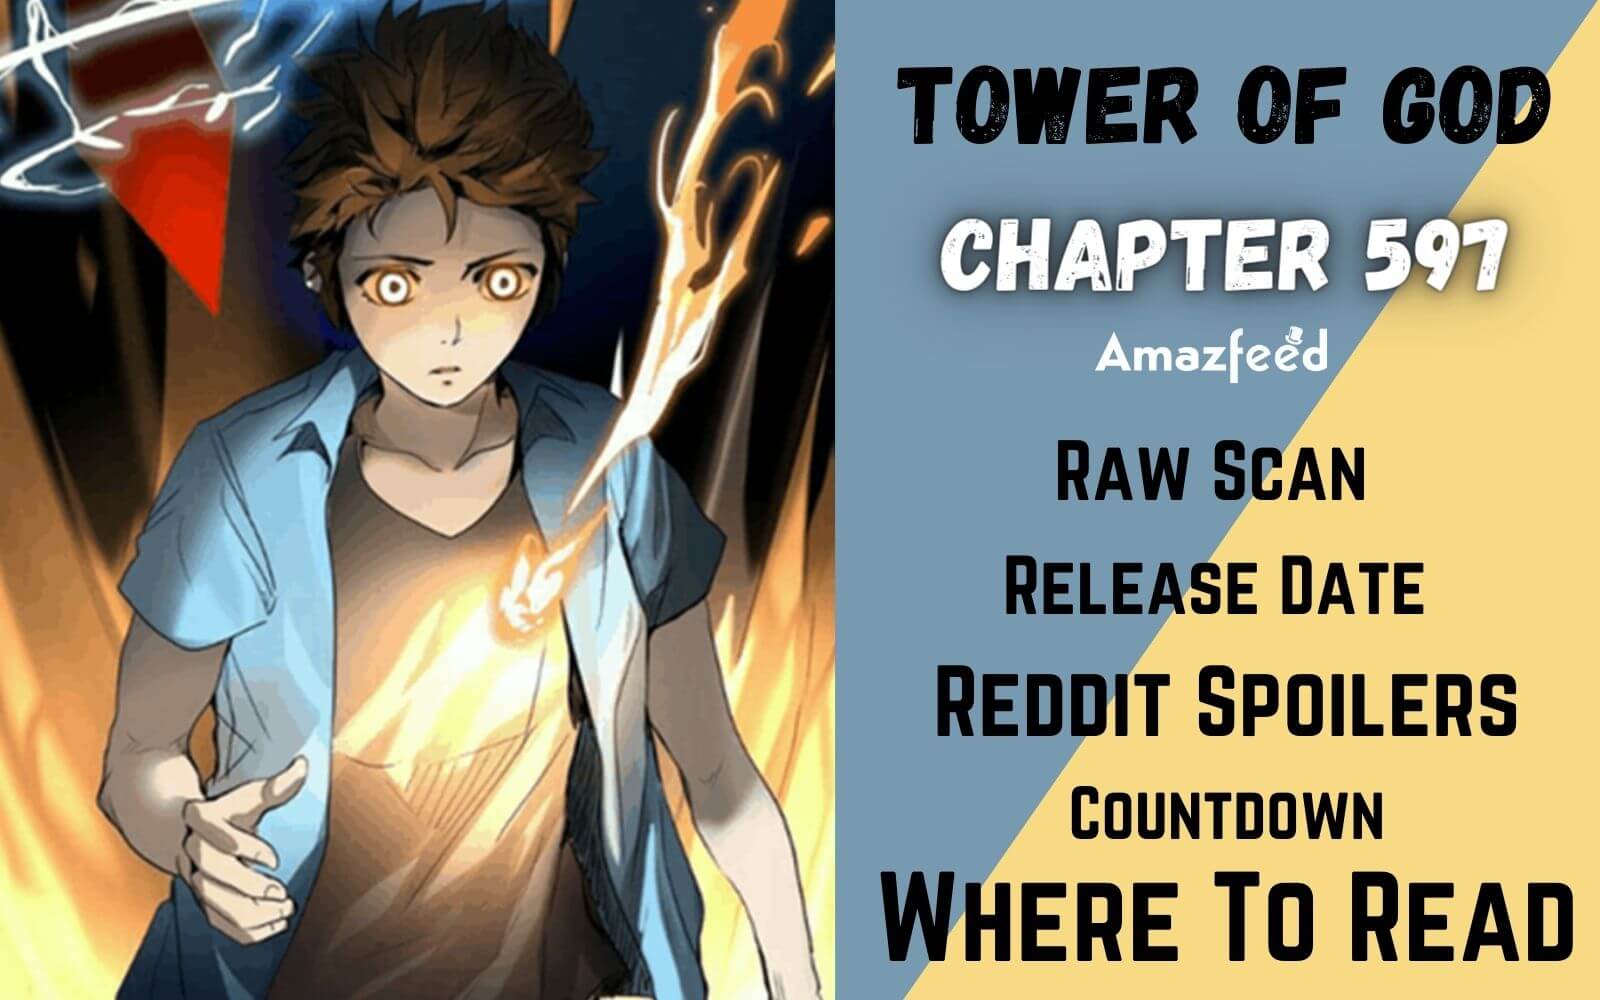 Tower Of God Chapter 597 Spoiler, Raw Scan, Release Date, Countdown & Where  to Read » Amazfeed